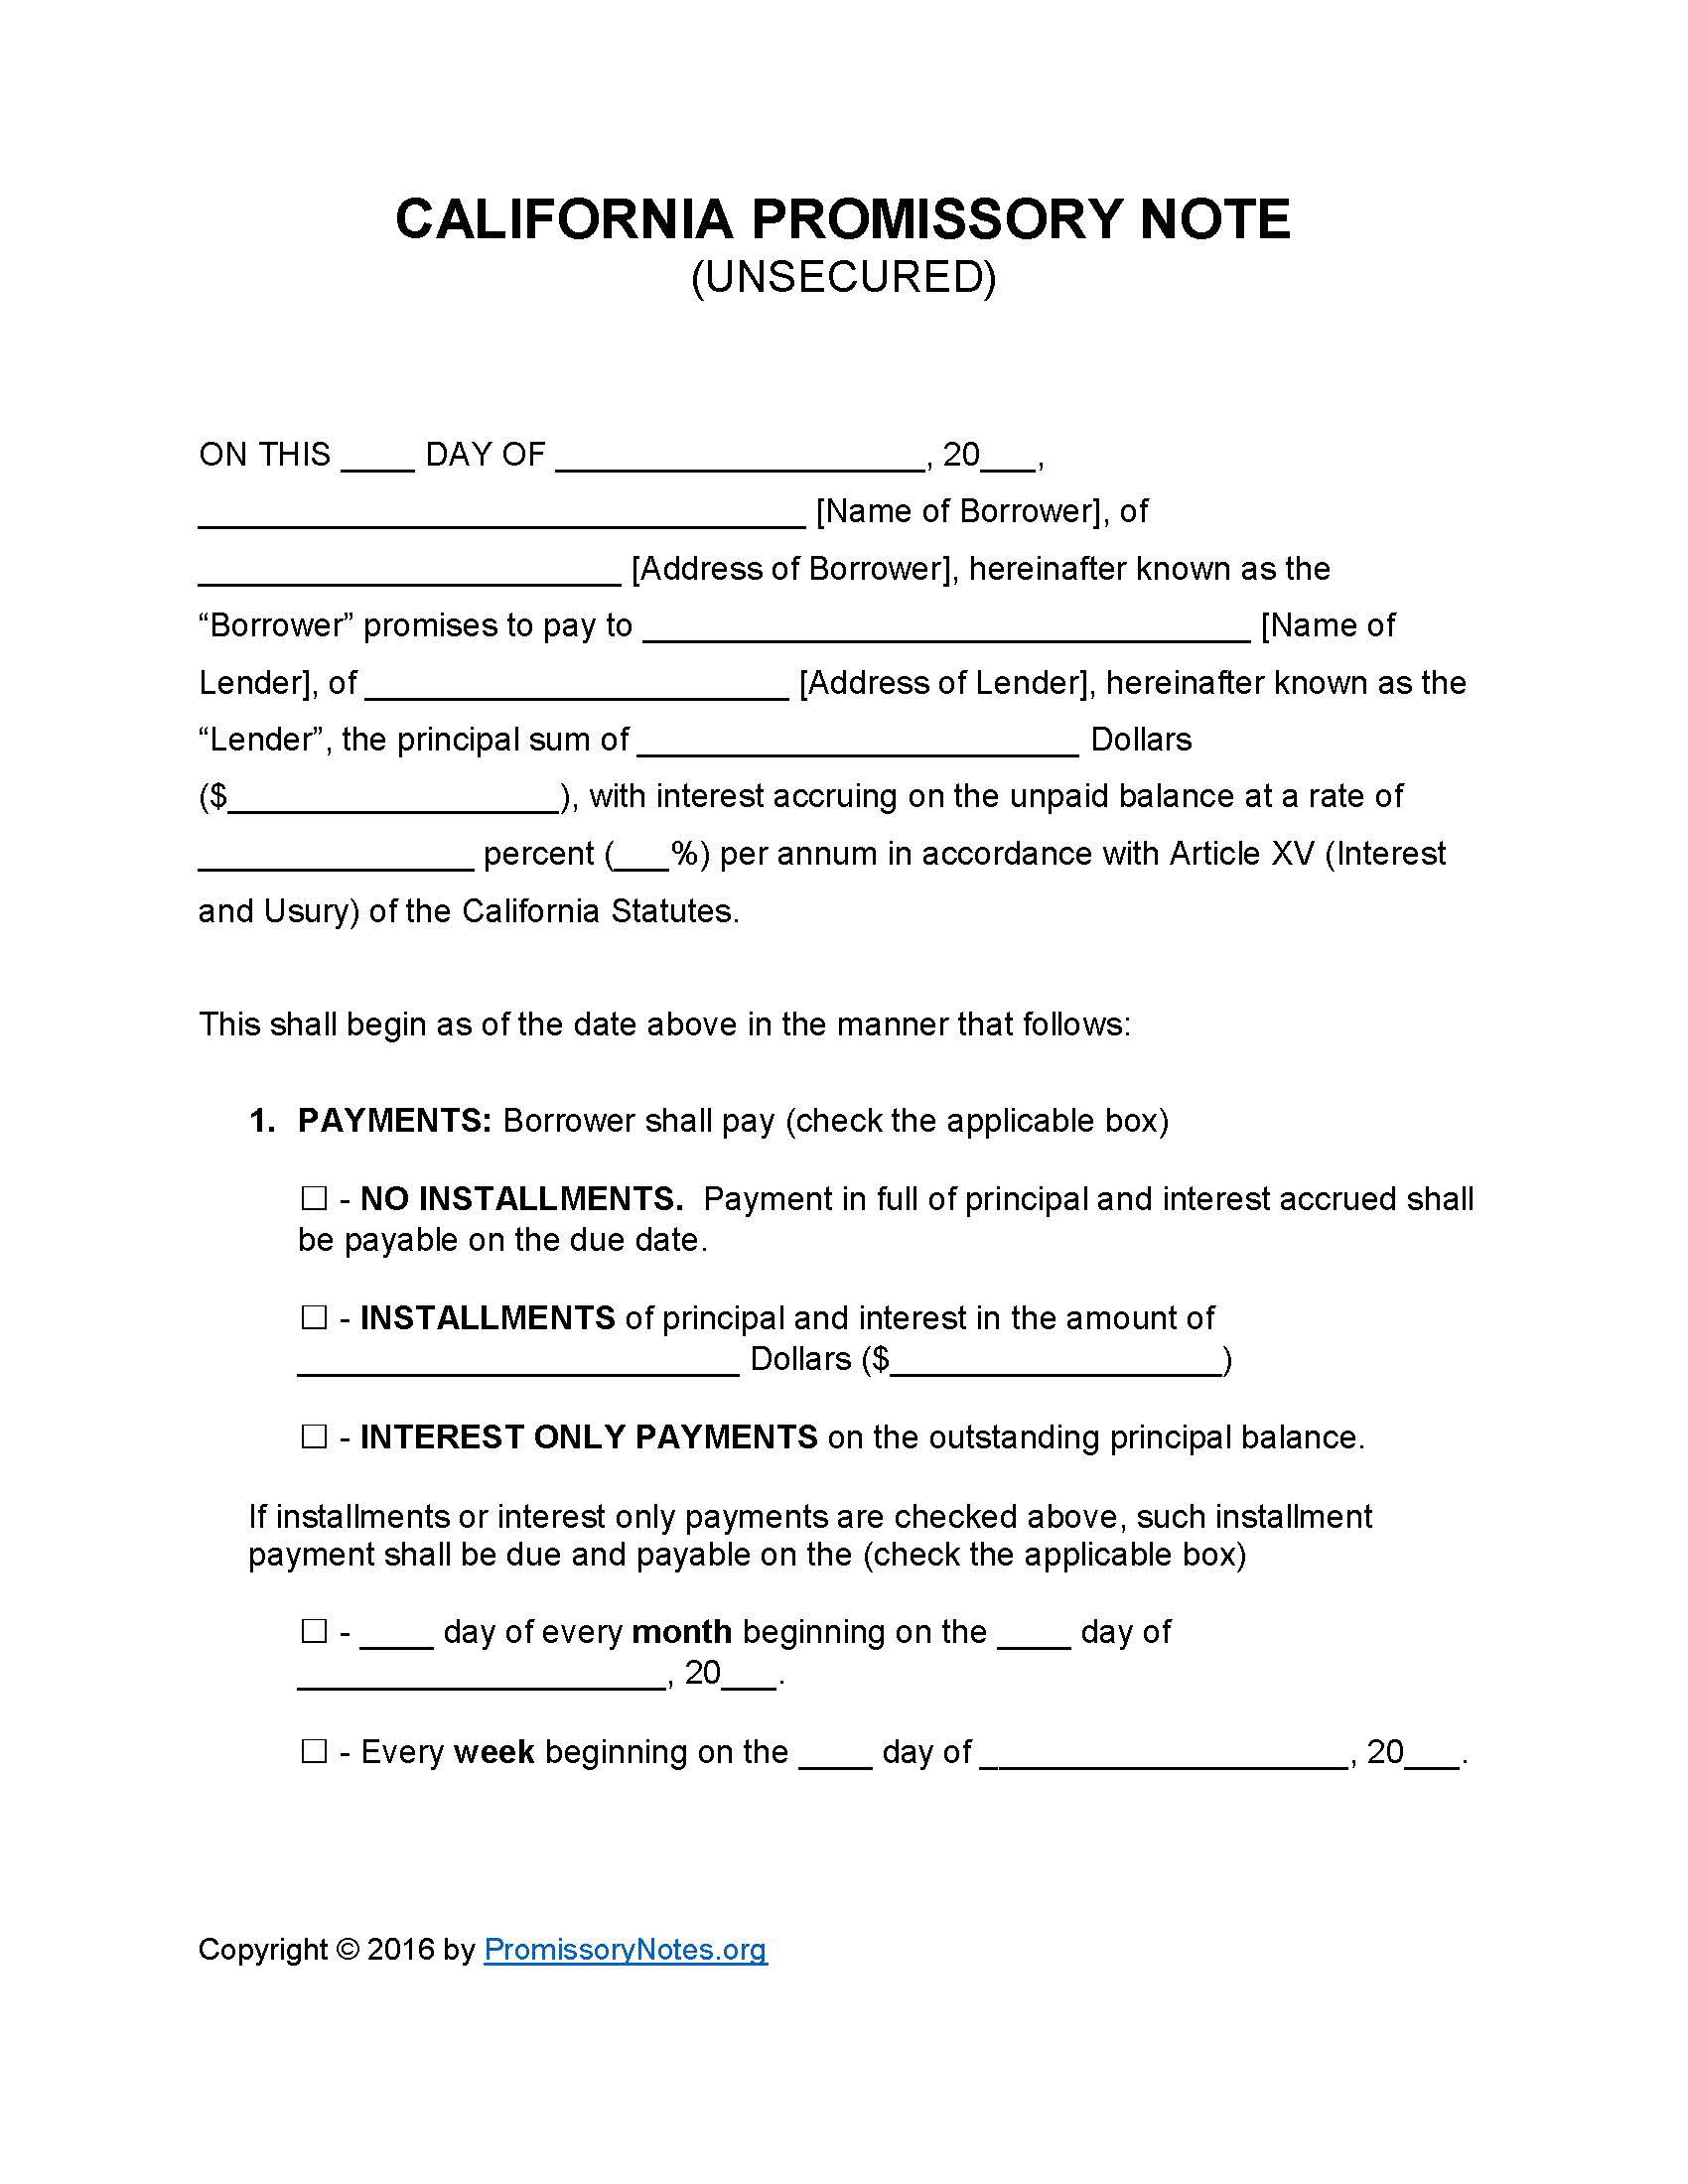 California Unsecured Promissory Note Template Promissory Notes